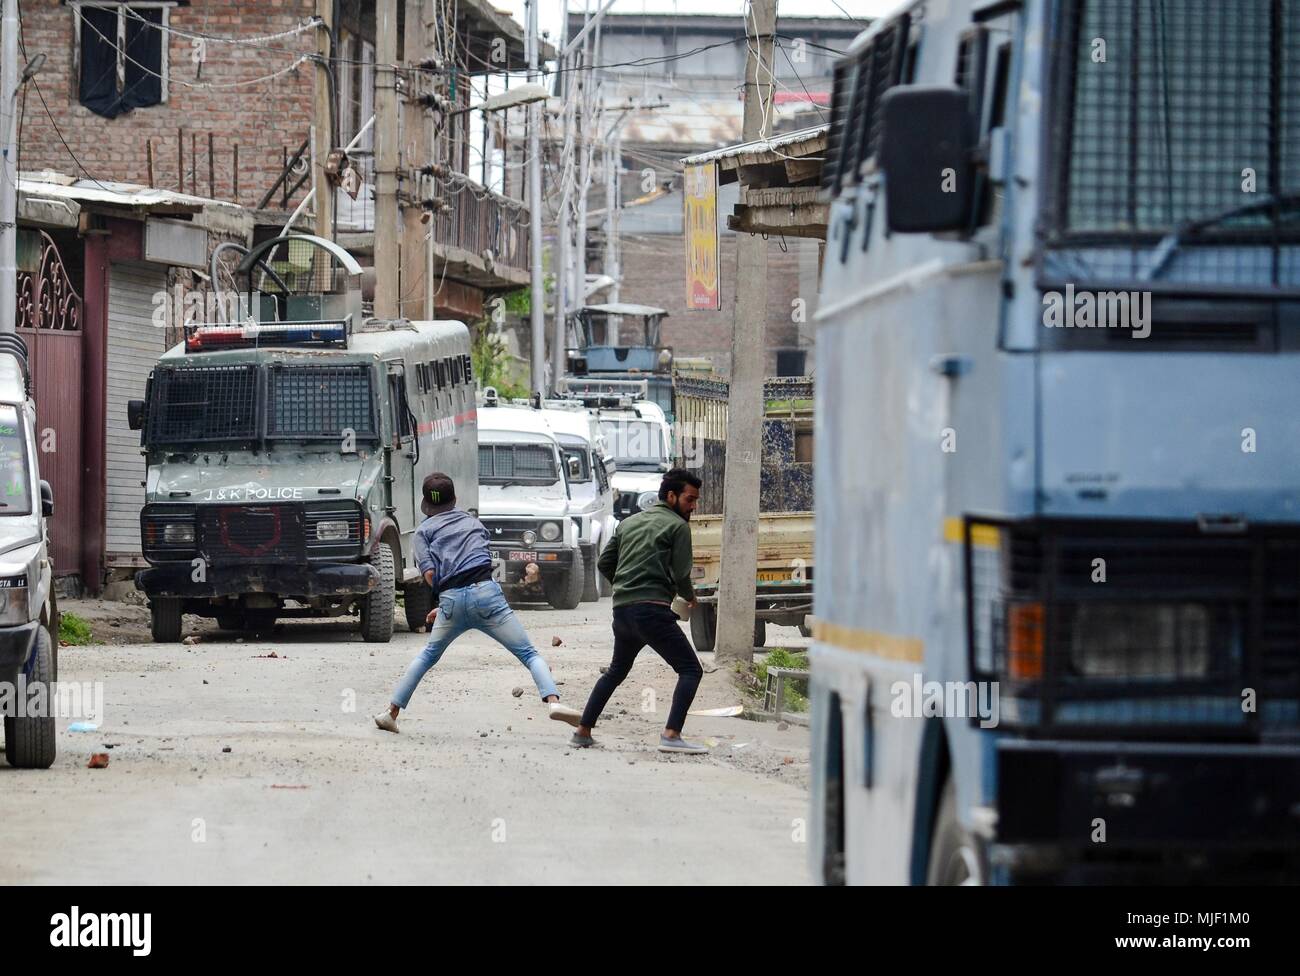 Kashmir, India, 5 May 2018.  Kashmiri protesters throw stones towards Indian police vehicles near the encounter site in Srinagar, Indian administered Kashmir. Three suspected militants and one civilian have been killed while three Indian paramilitary men sustained injuries in a gun battle in Srinagar, the summer capital of Indian administered Kashmir. The encounter started after government forces cordoned off a Chattabal area following the presence of militants in the area, officials said.  the militants were believed to be trapp Credit: ZUMA Press, Inc./Alamy Live News Stock Photo